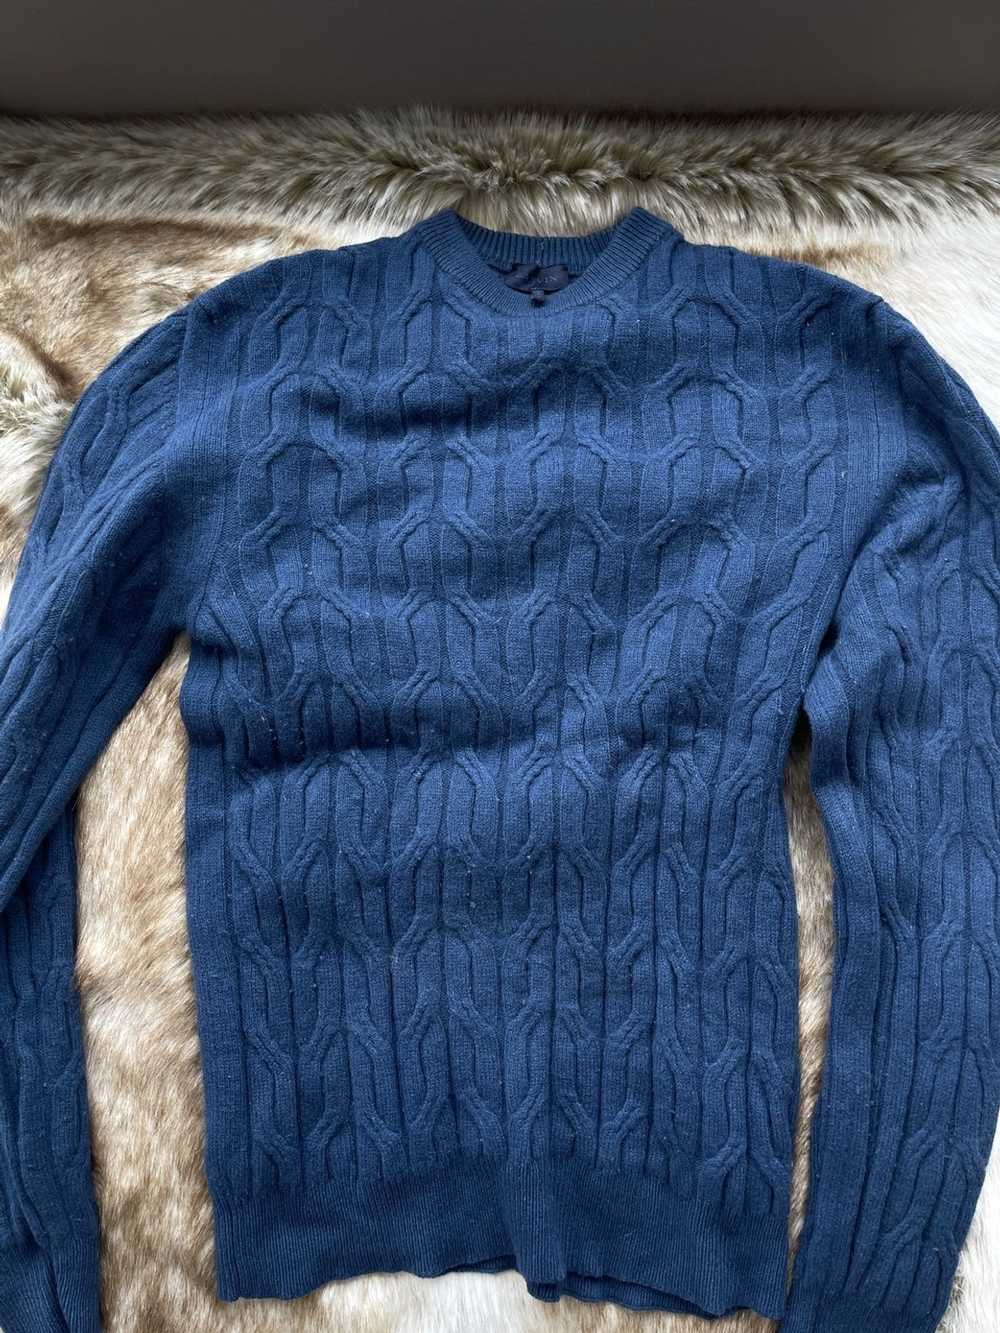 Lanvin Cable knit sweater - image 4